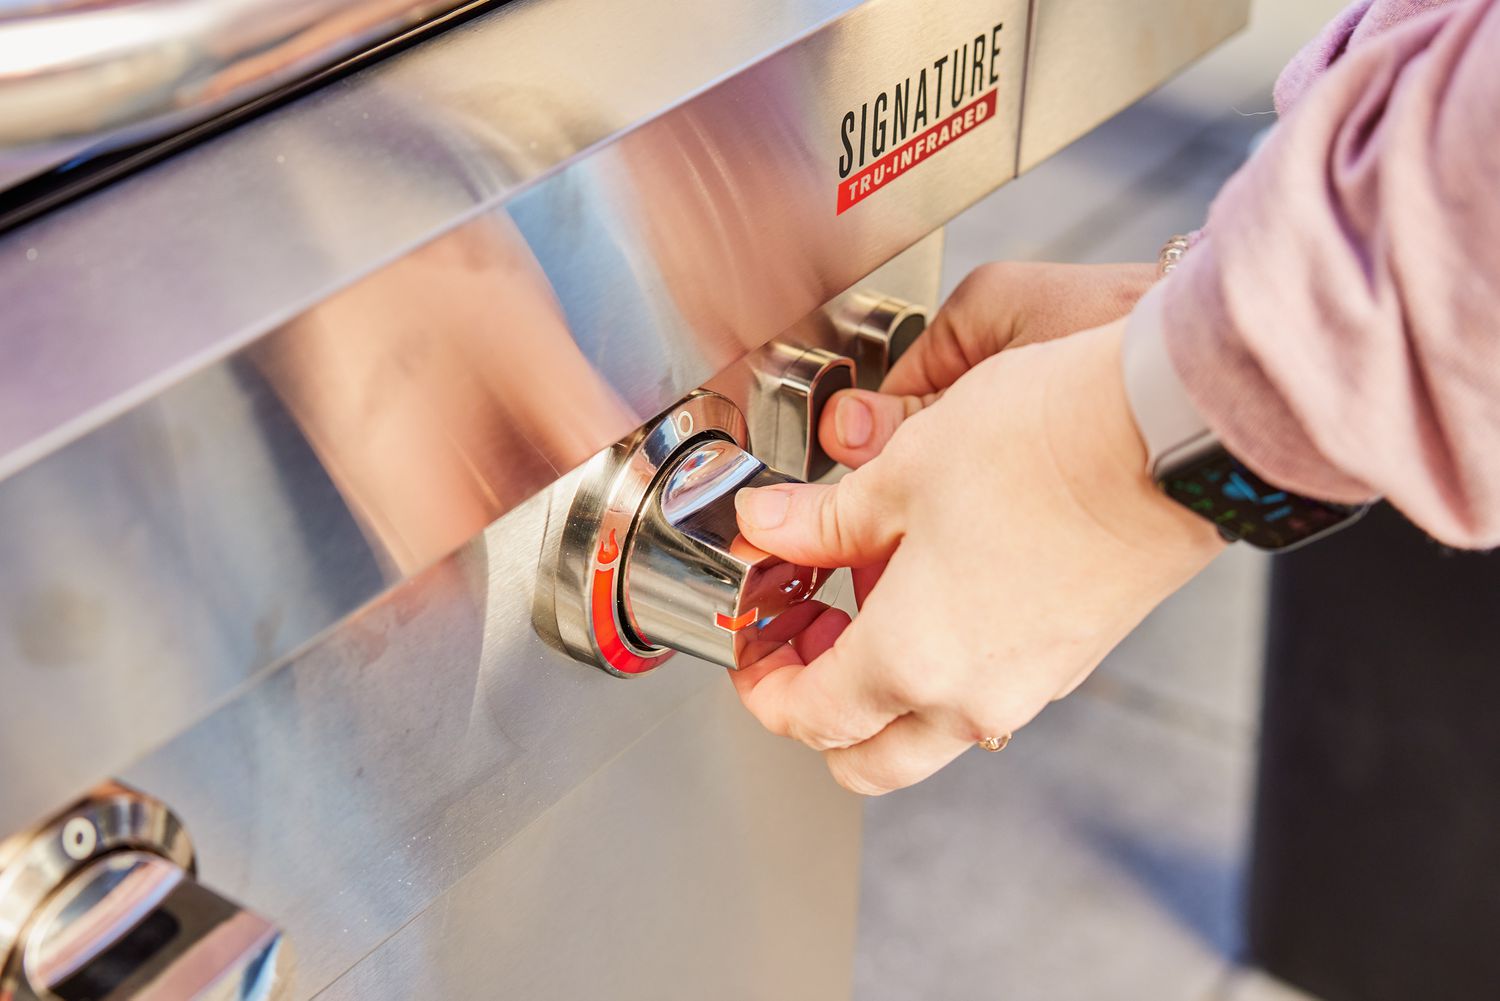 Hands turning a knob and pressing a button on the Char-Broil Signature Series Amplifire 2-Burner Gas Grill